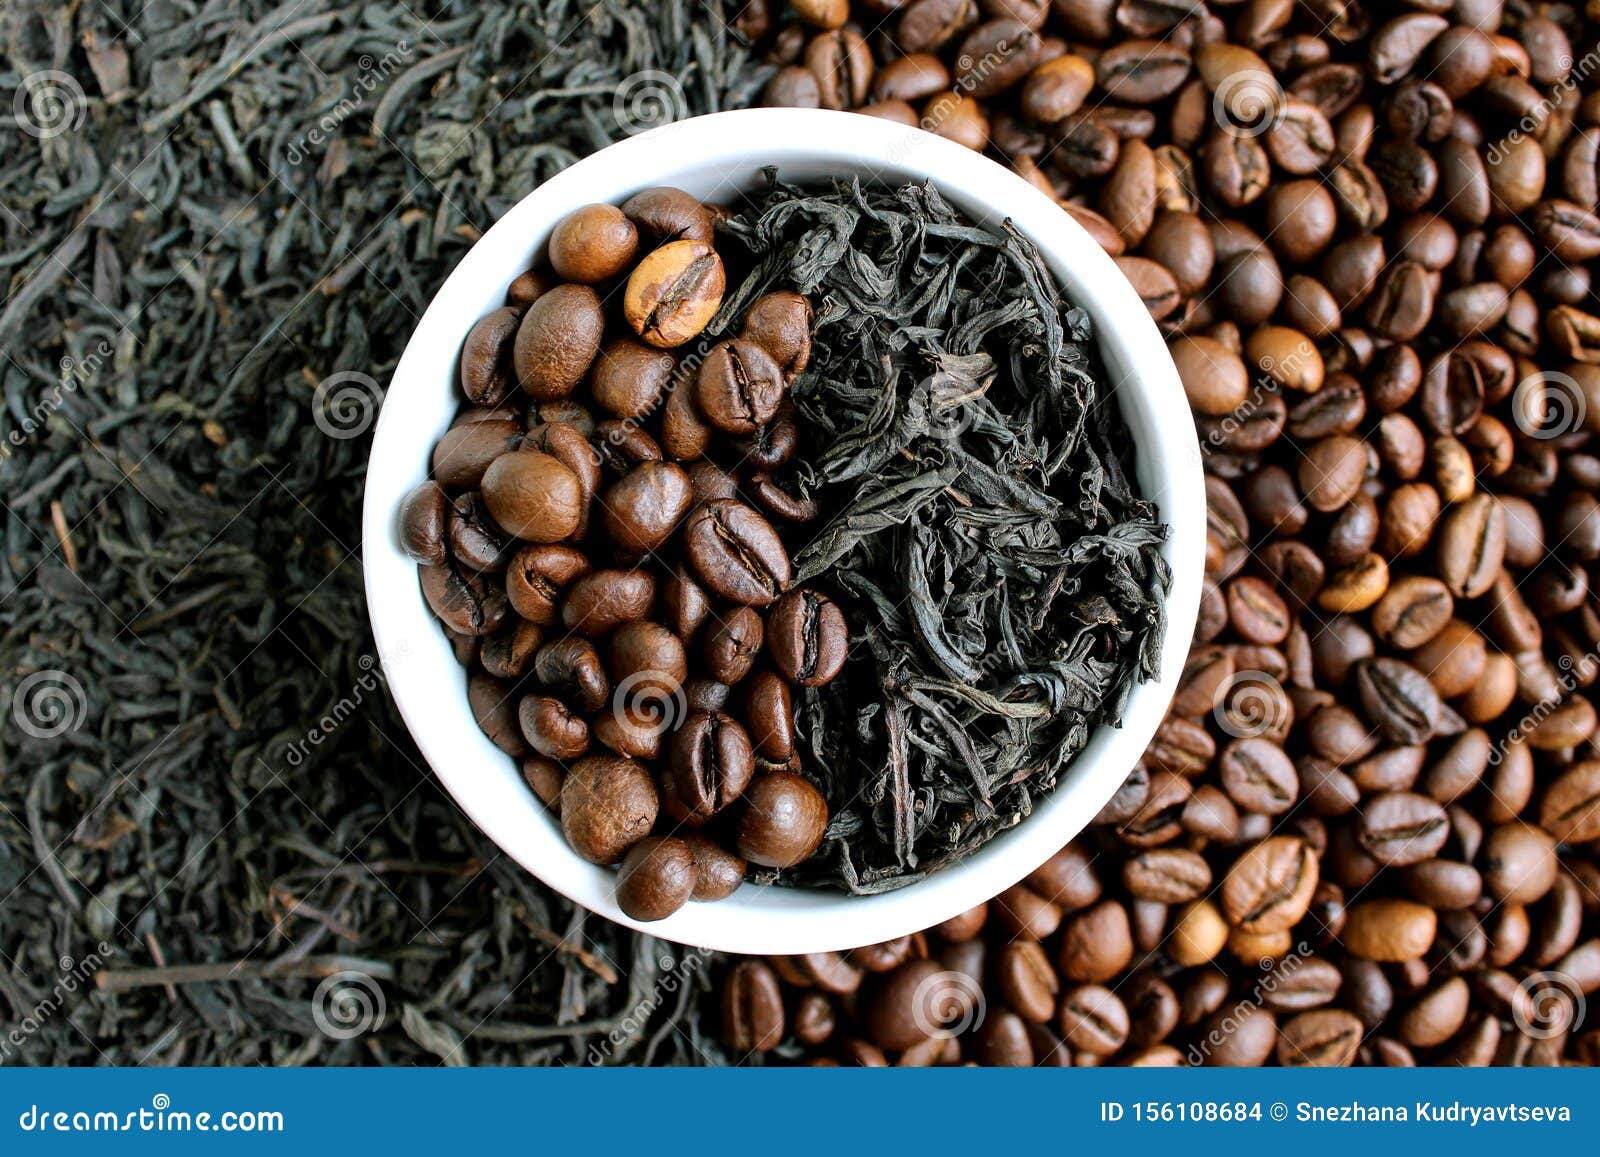 Coffee Beans and Tea in Leaves on the Same Plate Stock Photo Image of